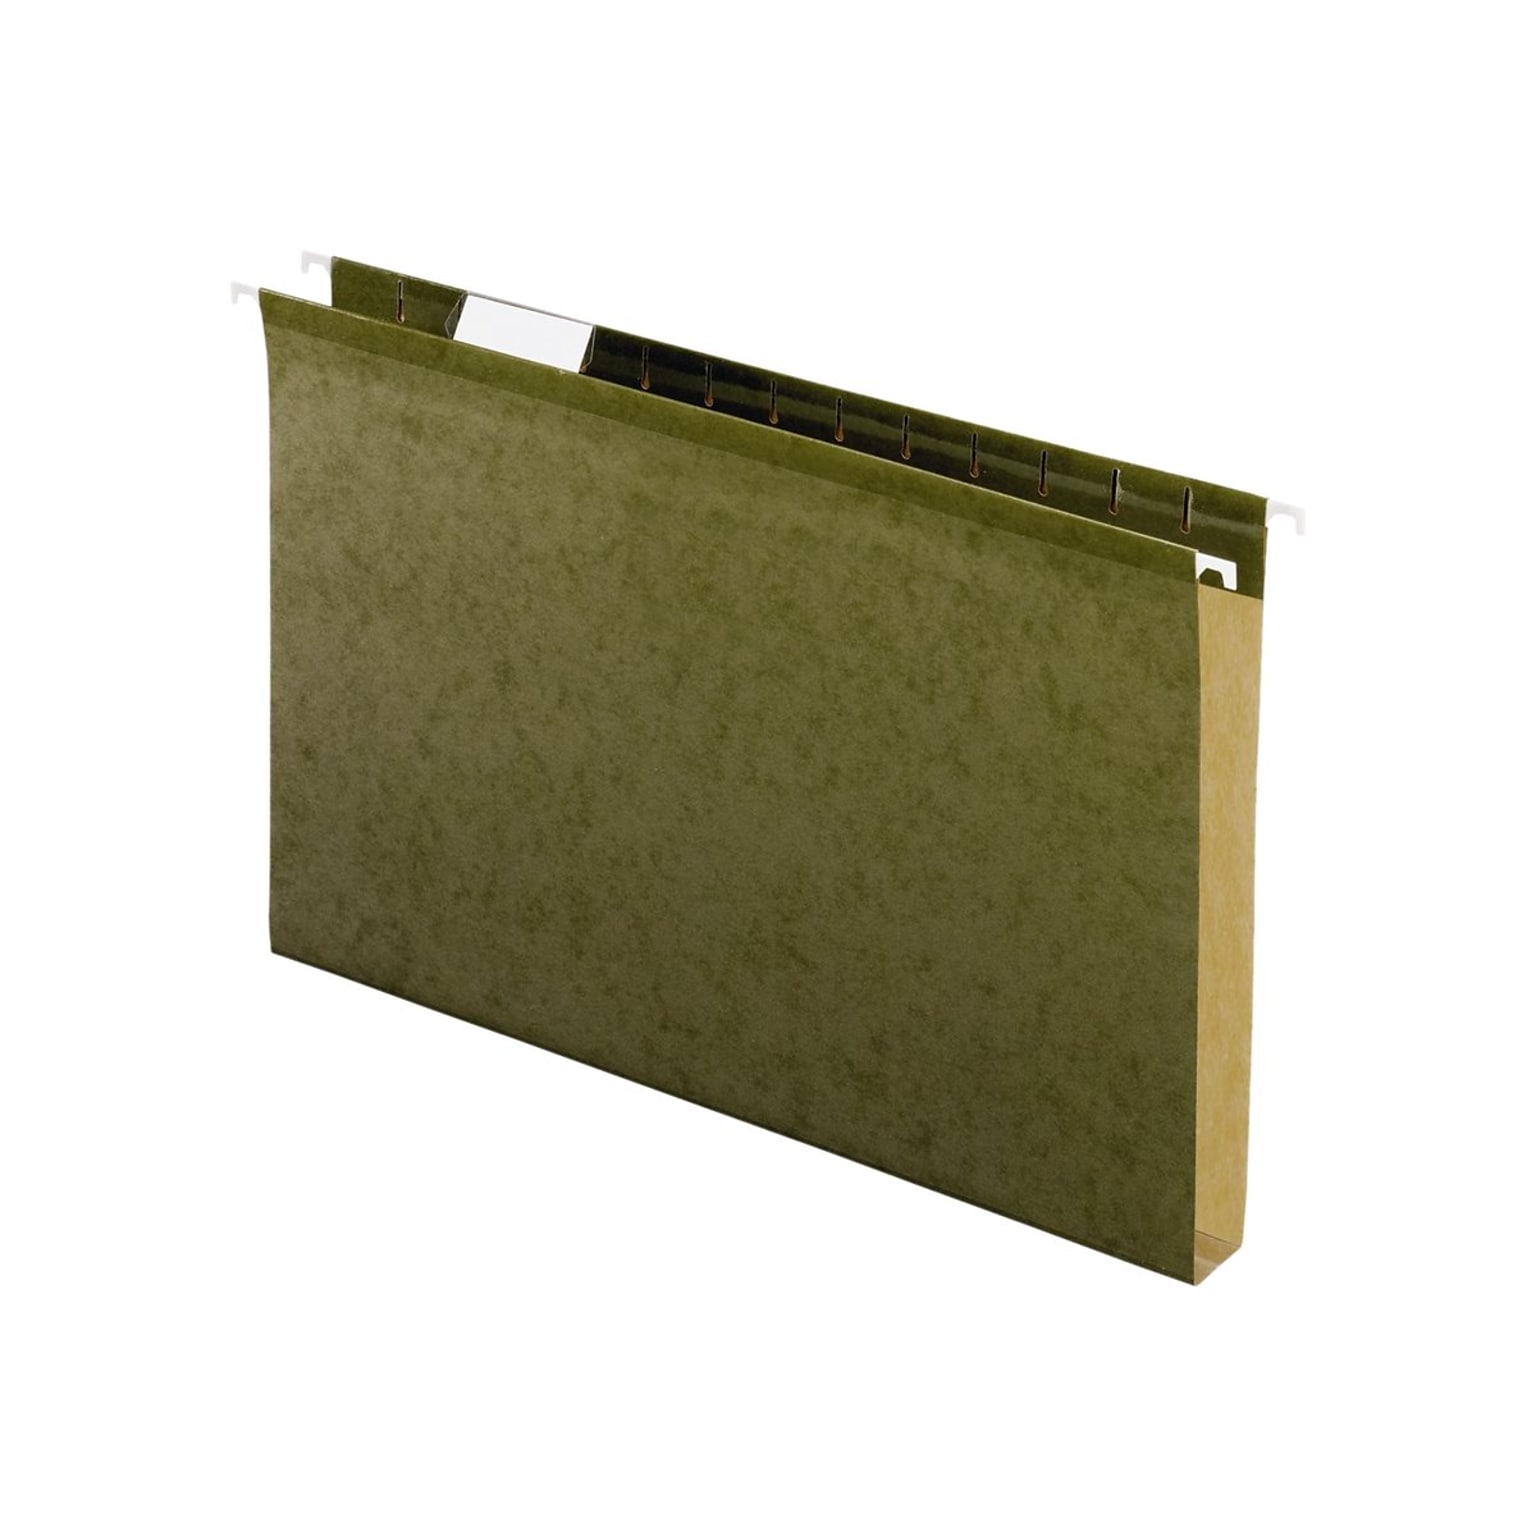 Pendaflex Reinforced Hanging File Folders, Extra Capacity, 1 Expansion, Legal Size, Standard Green, 25/Box (PFX 04153x1)